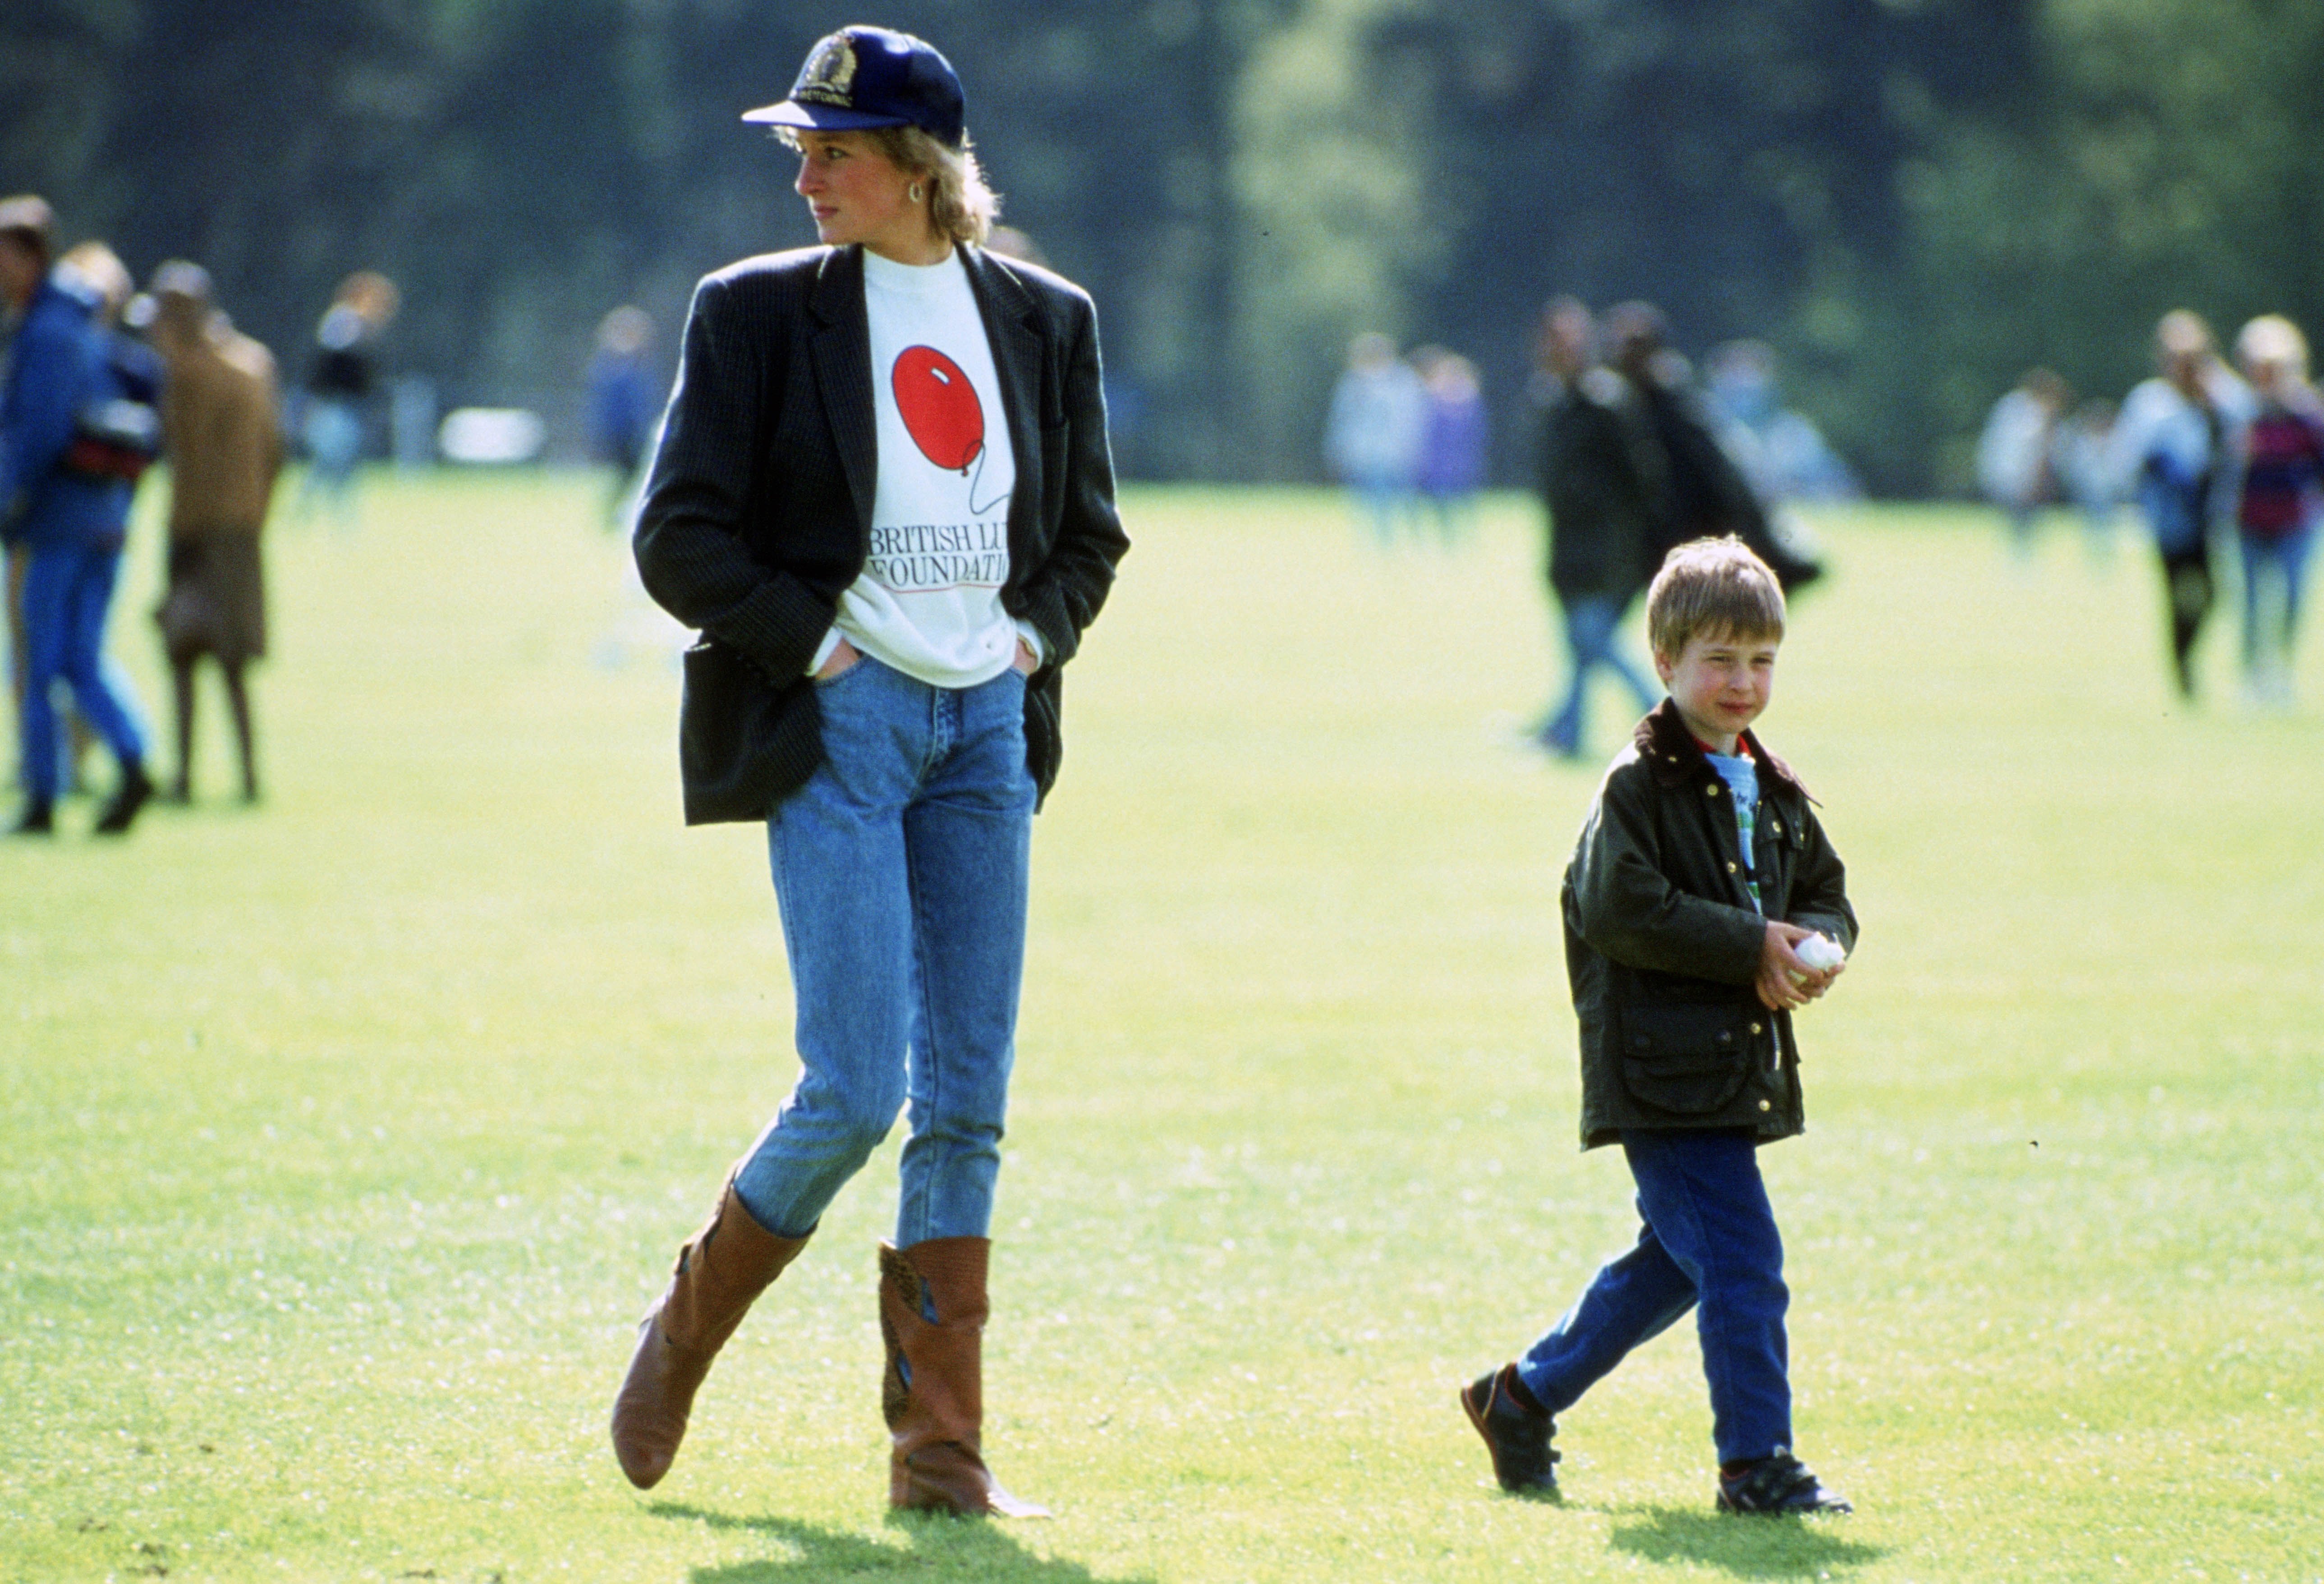 Princess Diana and Prince William at Guards Polo Club. | Source: Getty Images